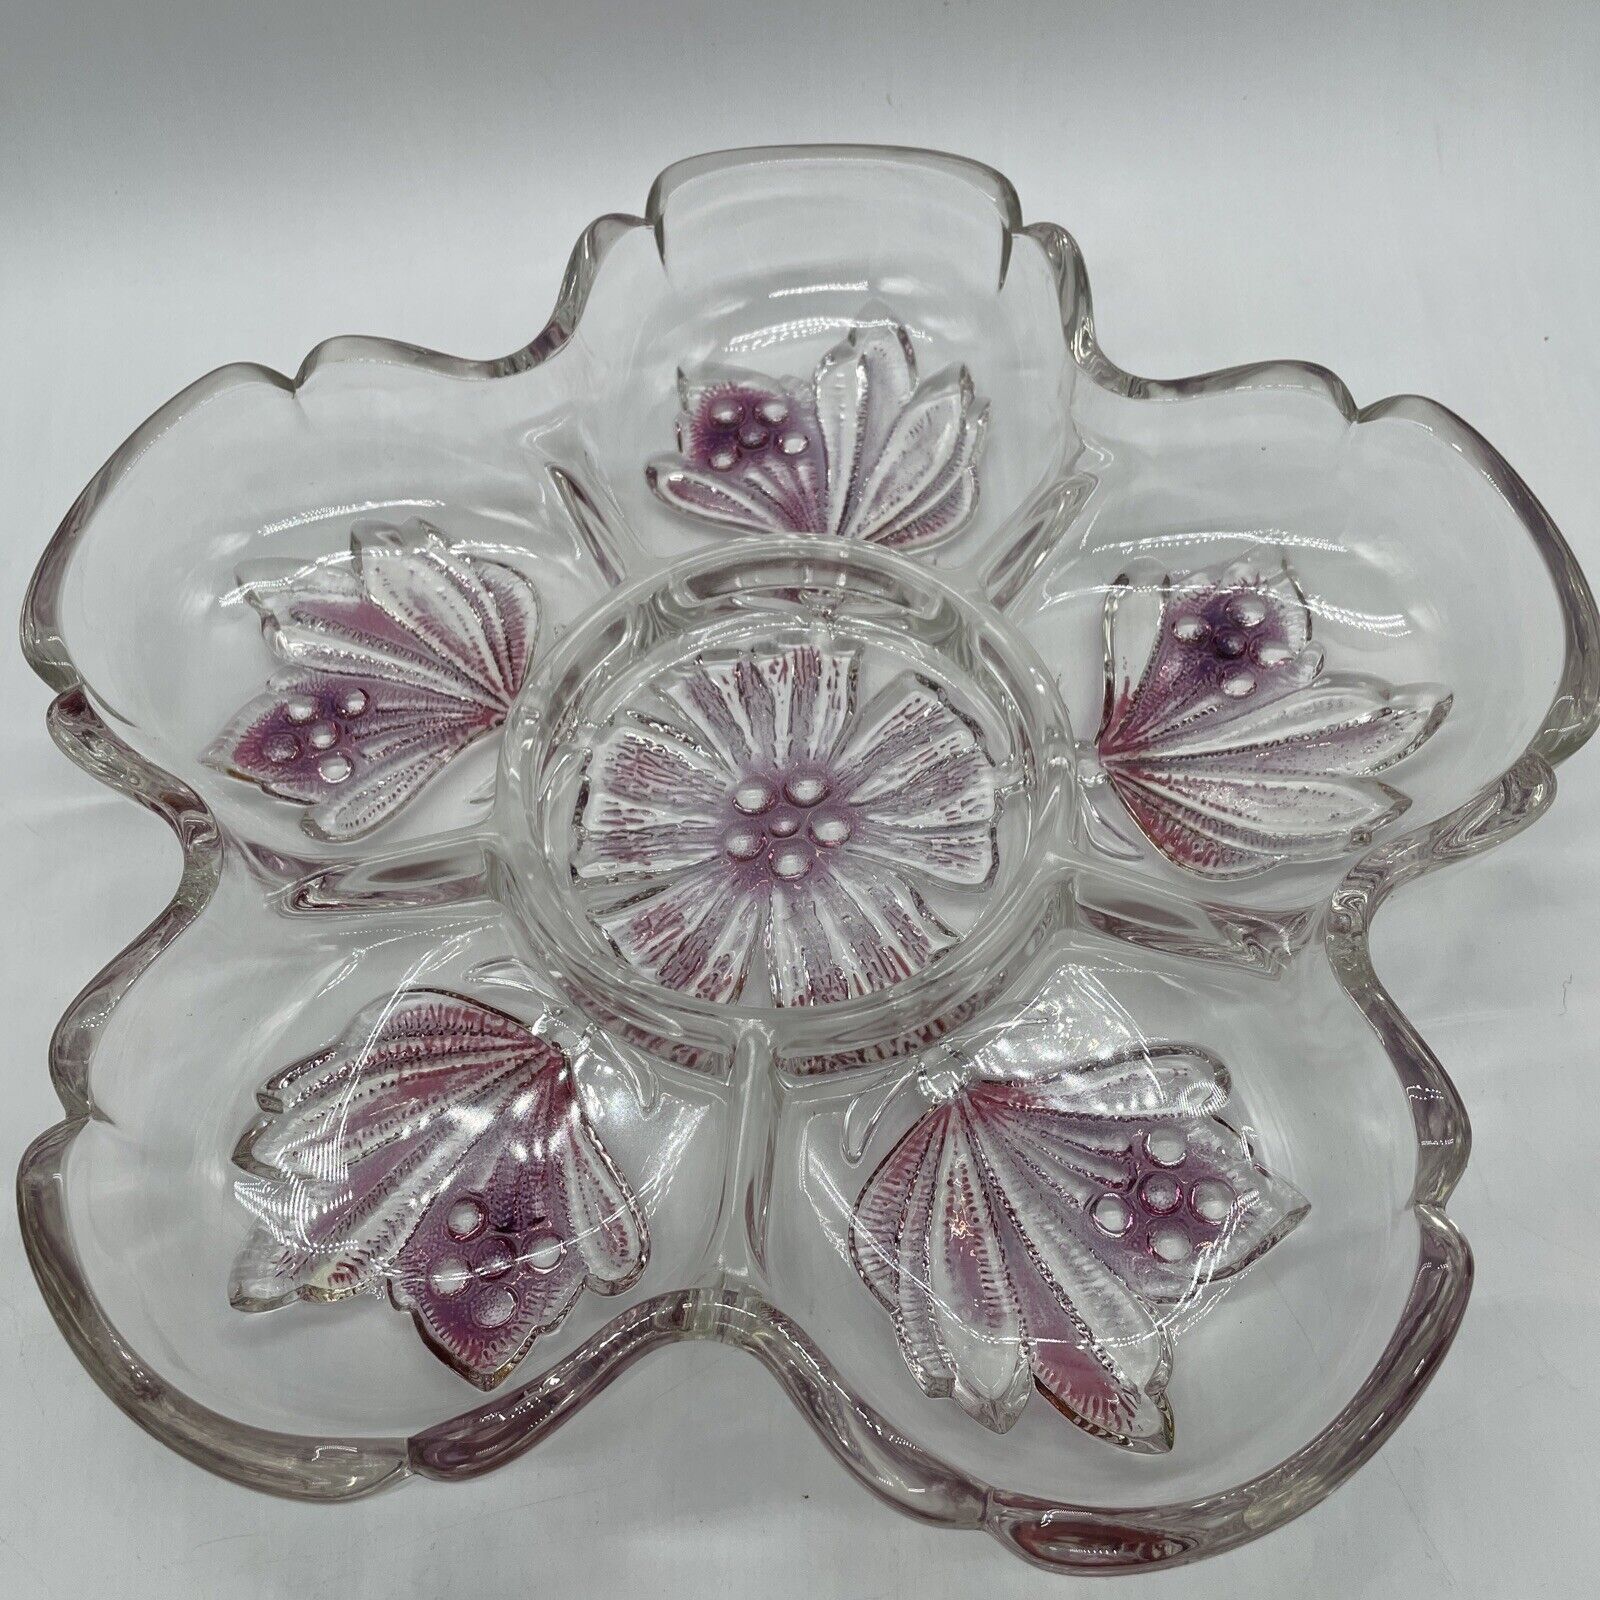 VTG German Renaissance Hors D’oeuvres 6 Compartments Platte-Walther Glass-Unused